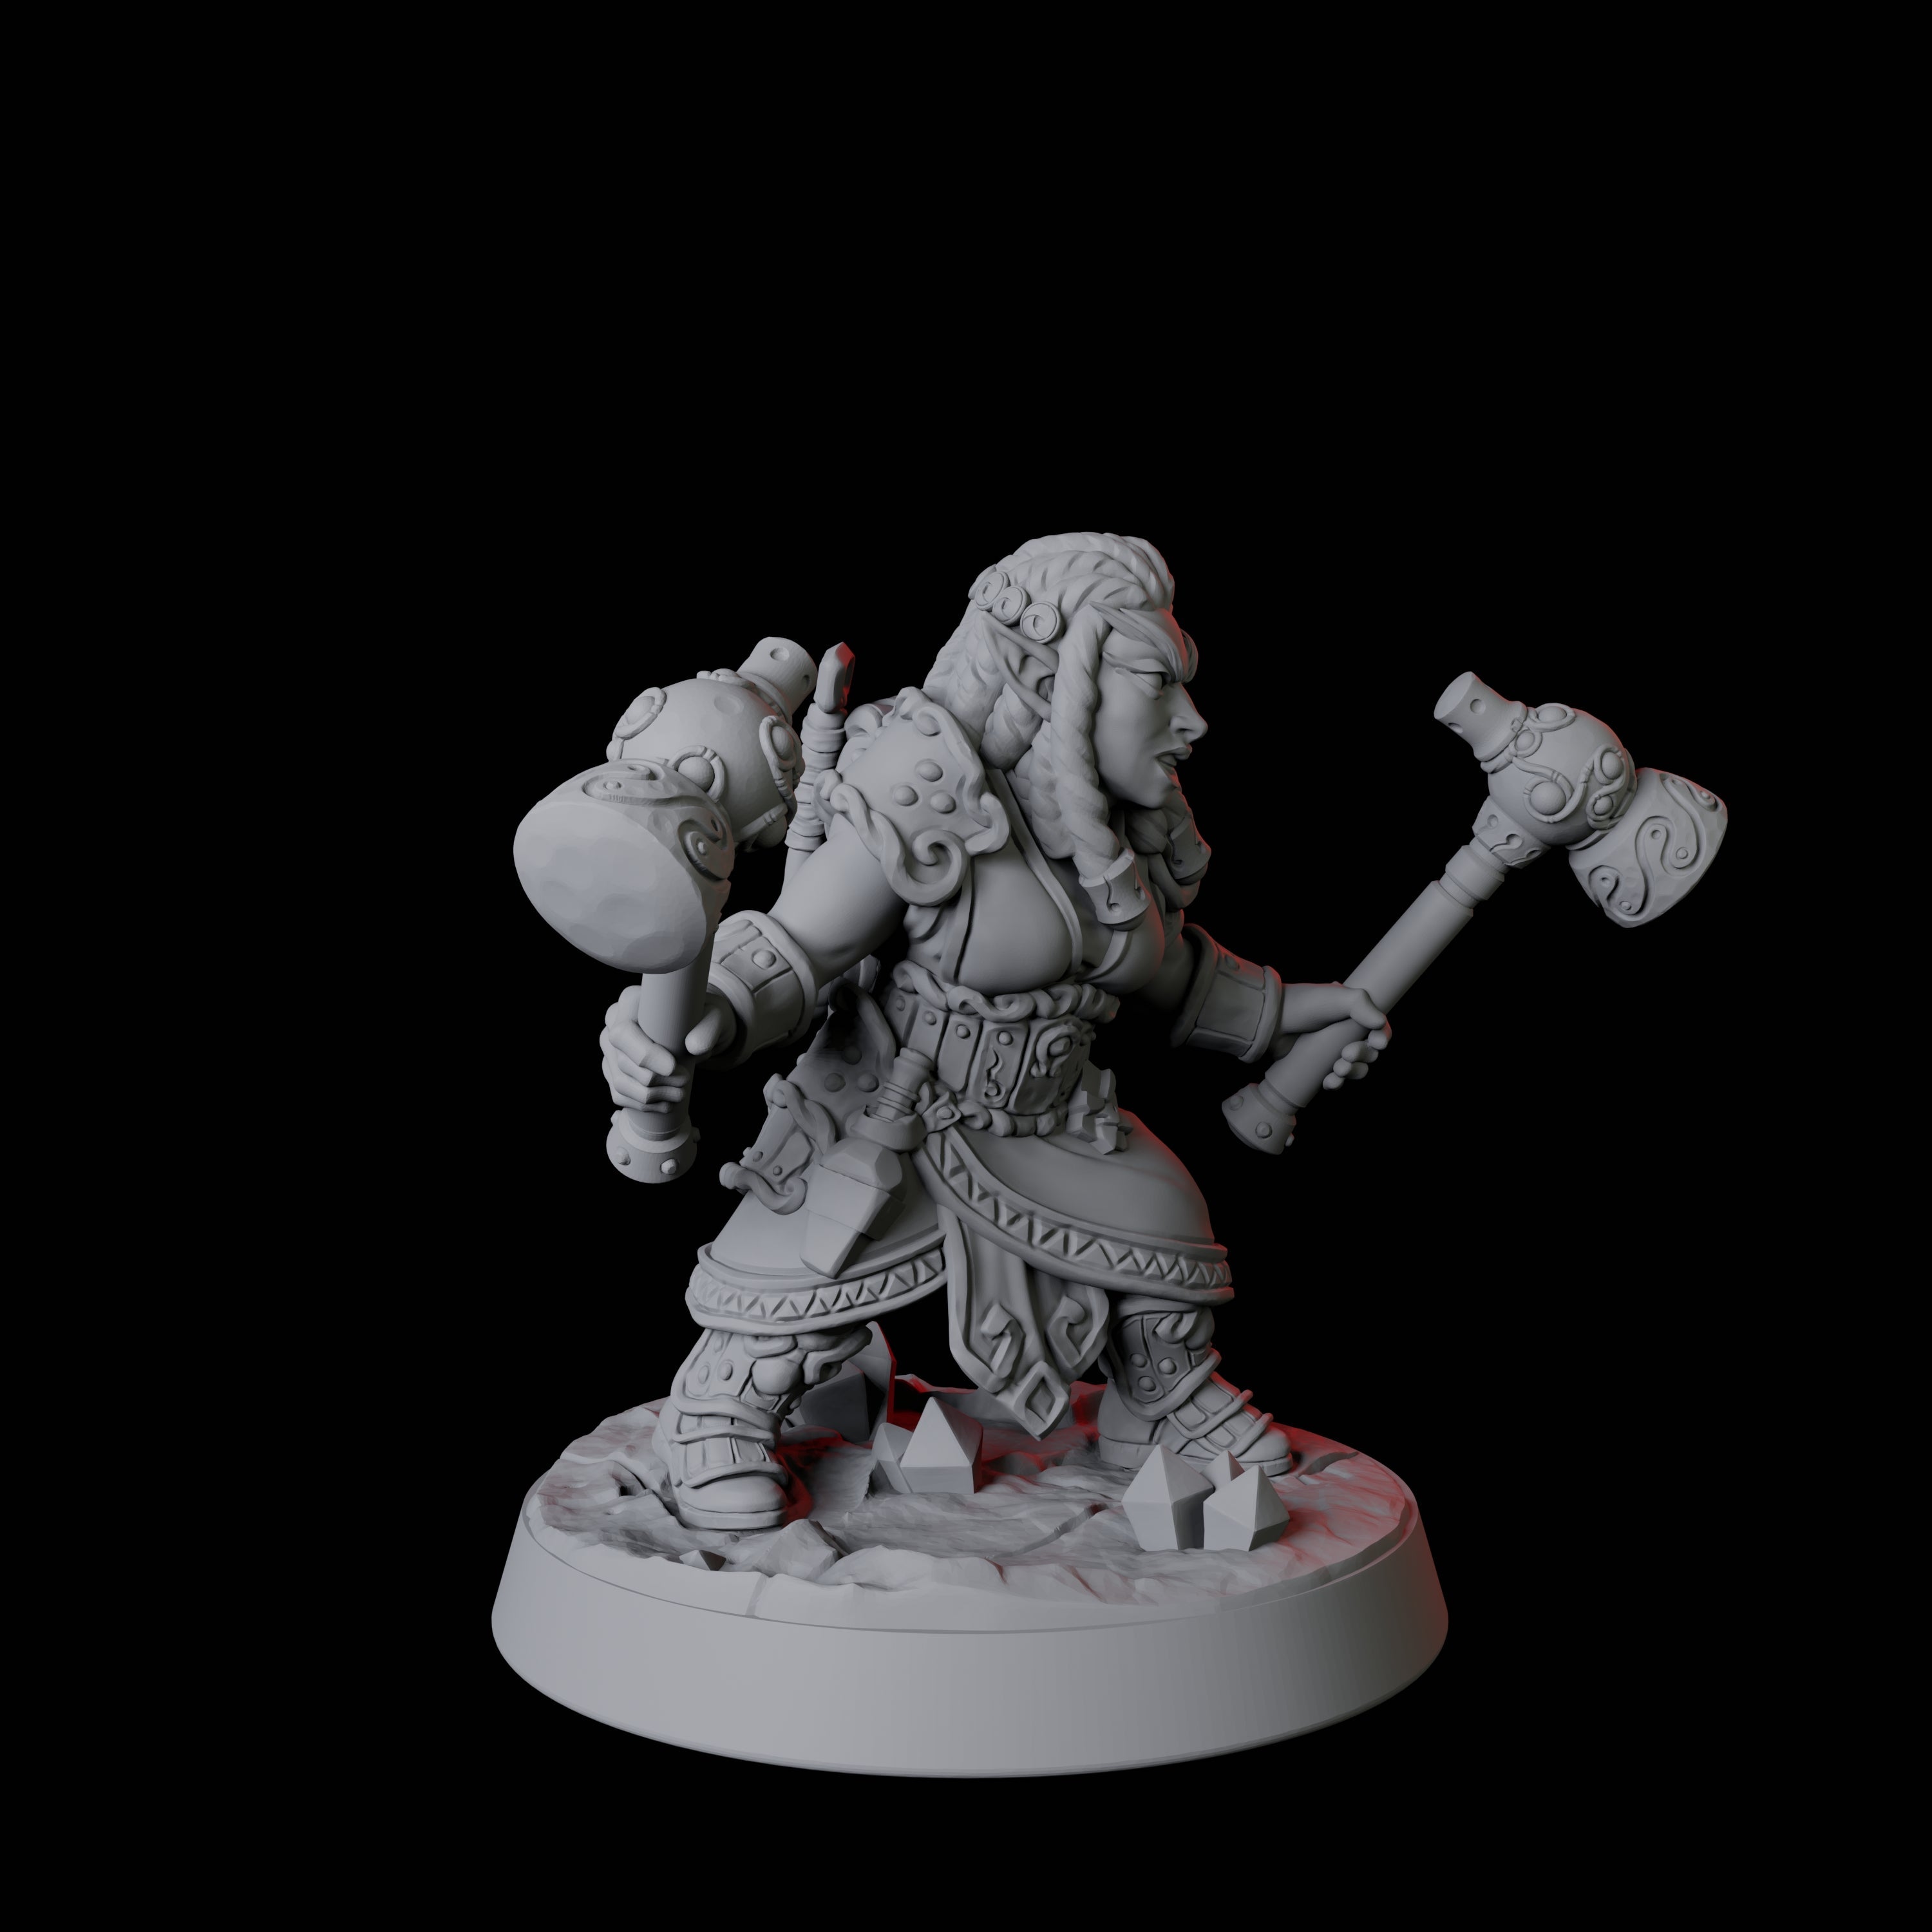 Gnome Miner F Miniature for Dungeons and Dragons, Pathfinder or other TTRPGs